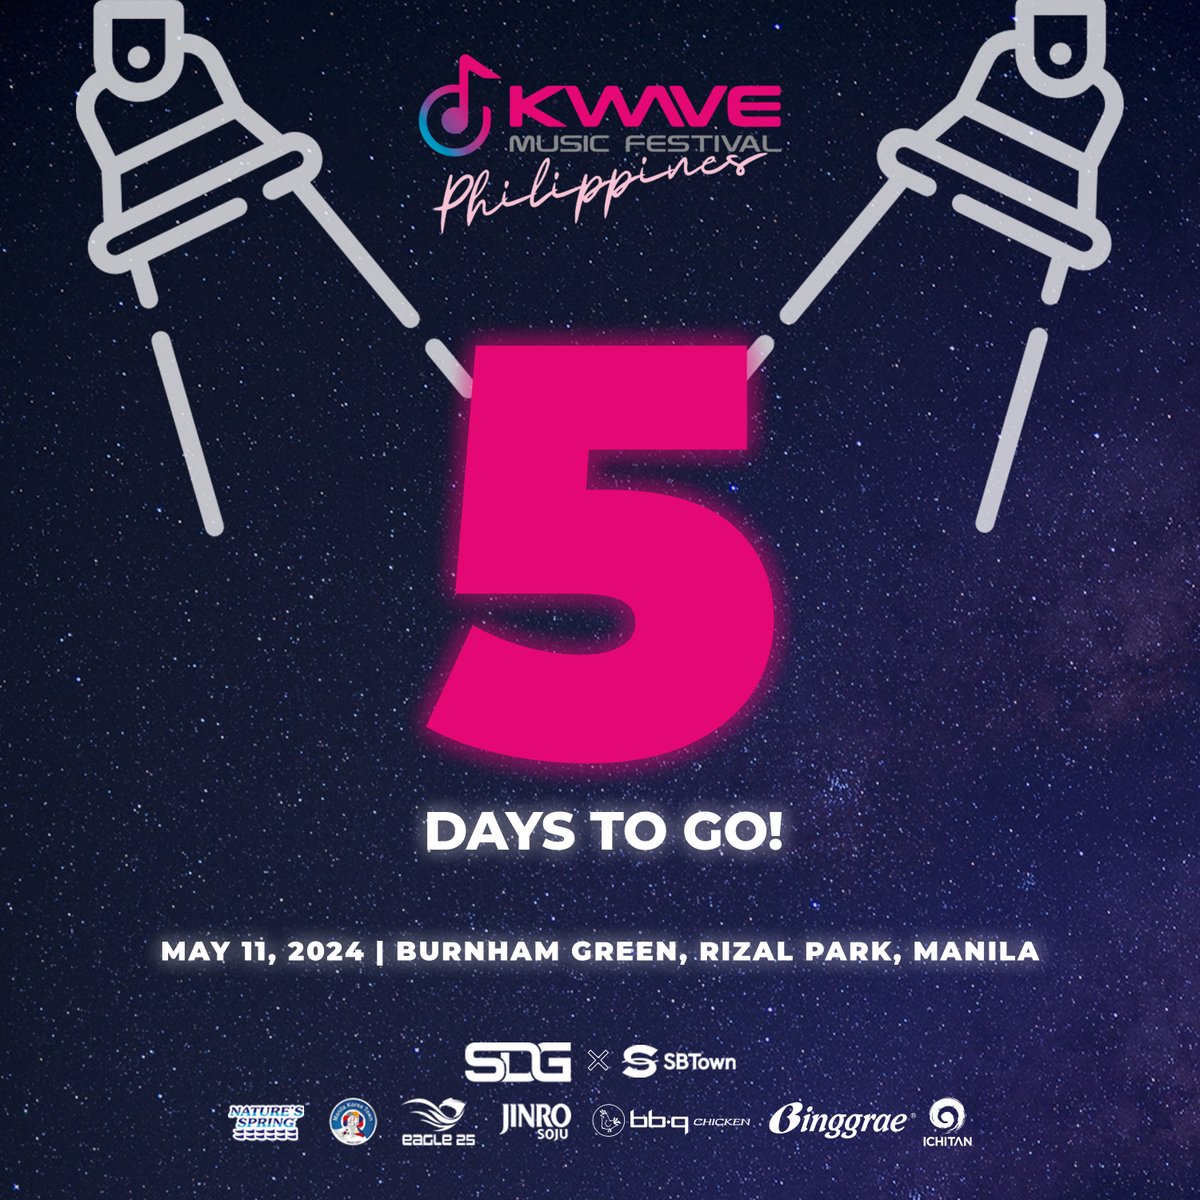 🌊 Just 5 days to go until KWAVE hits the shore!

Press 5 if you're ready to ride the wave! 🖐

#THEBOYZ #fromis_9 #PLUUS #YGIG #YARA #KAIA #KWAVEPH #AbsolutelyLibre #KWAVEMusicFestival #BadmintonAsia #KWAVE